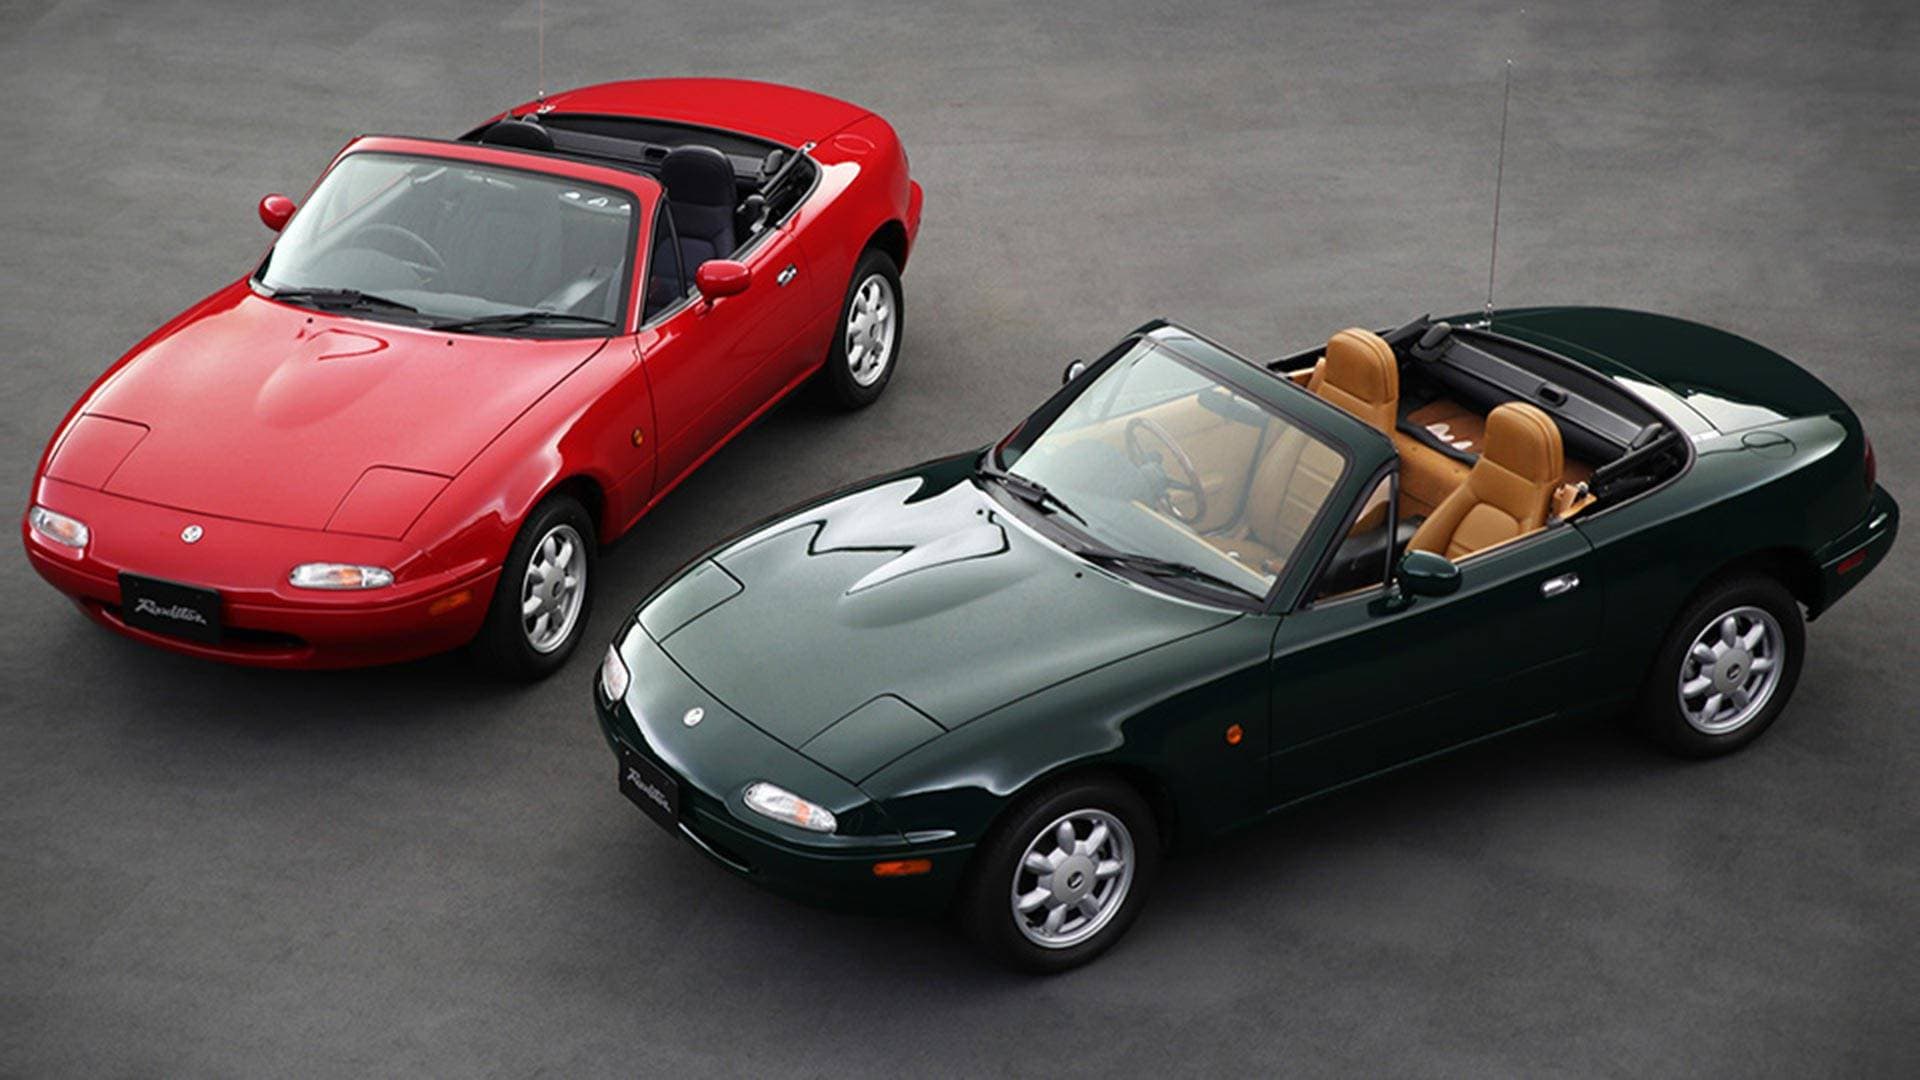 Mazda Will Restore Your NA Miata Roadster To Factory Perfection for $40K